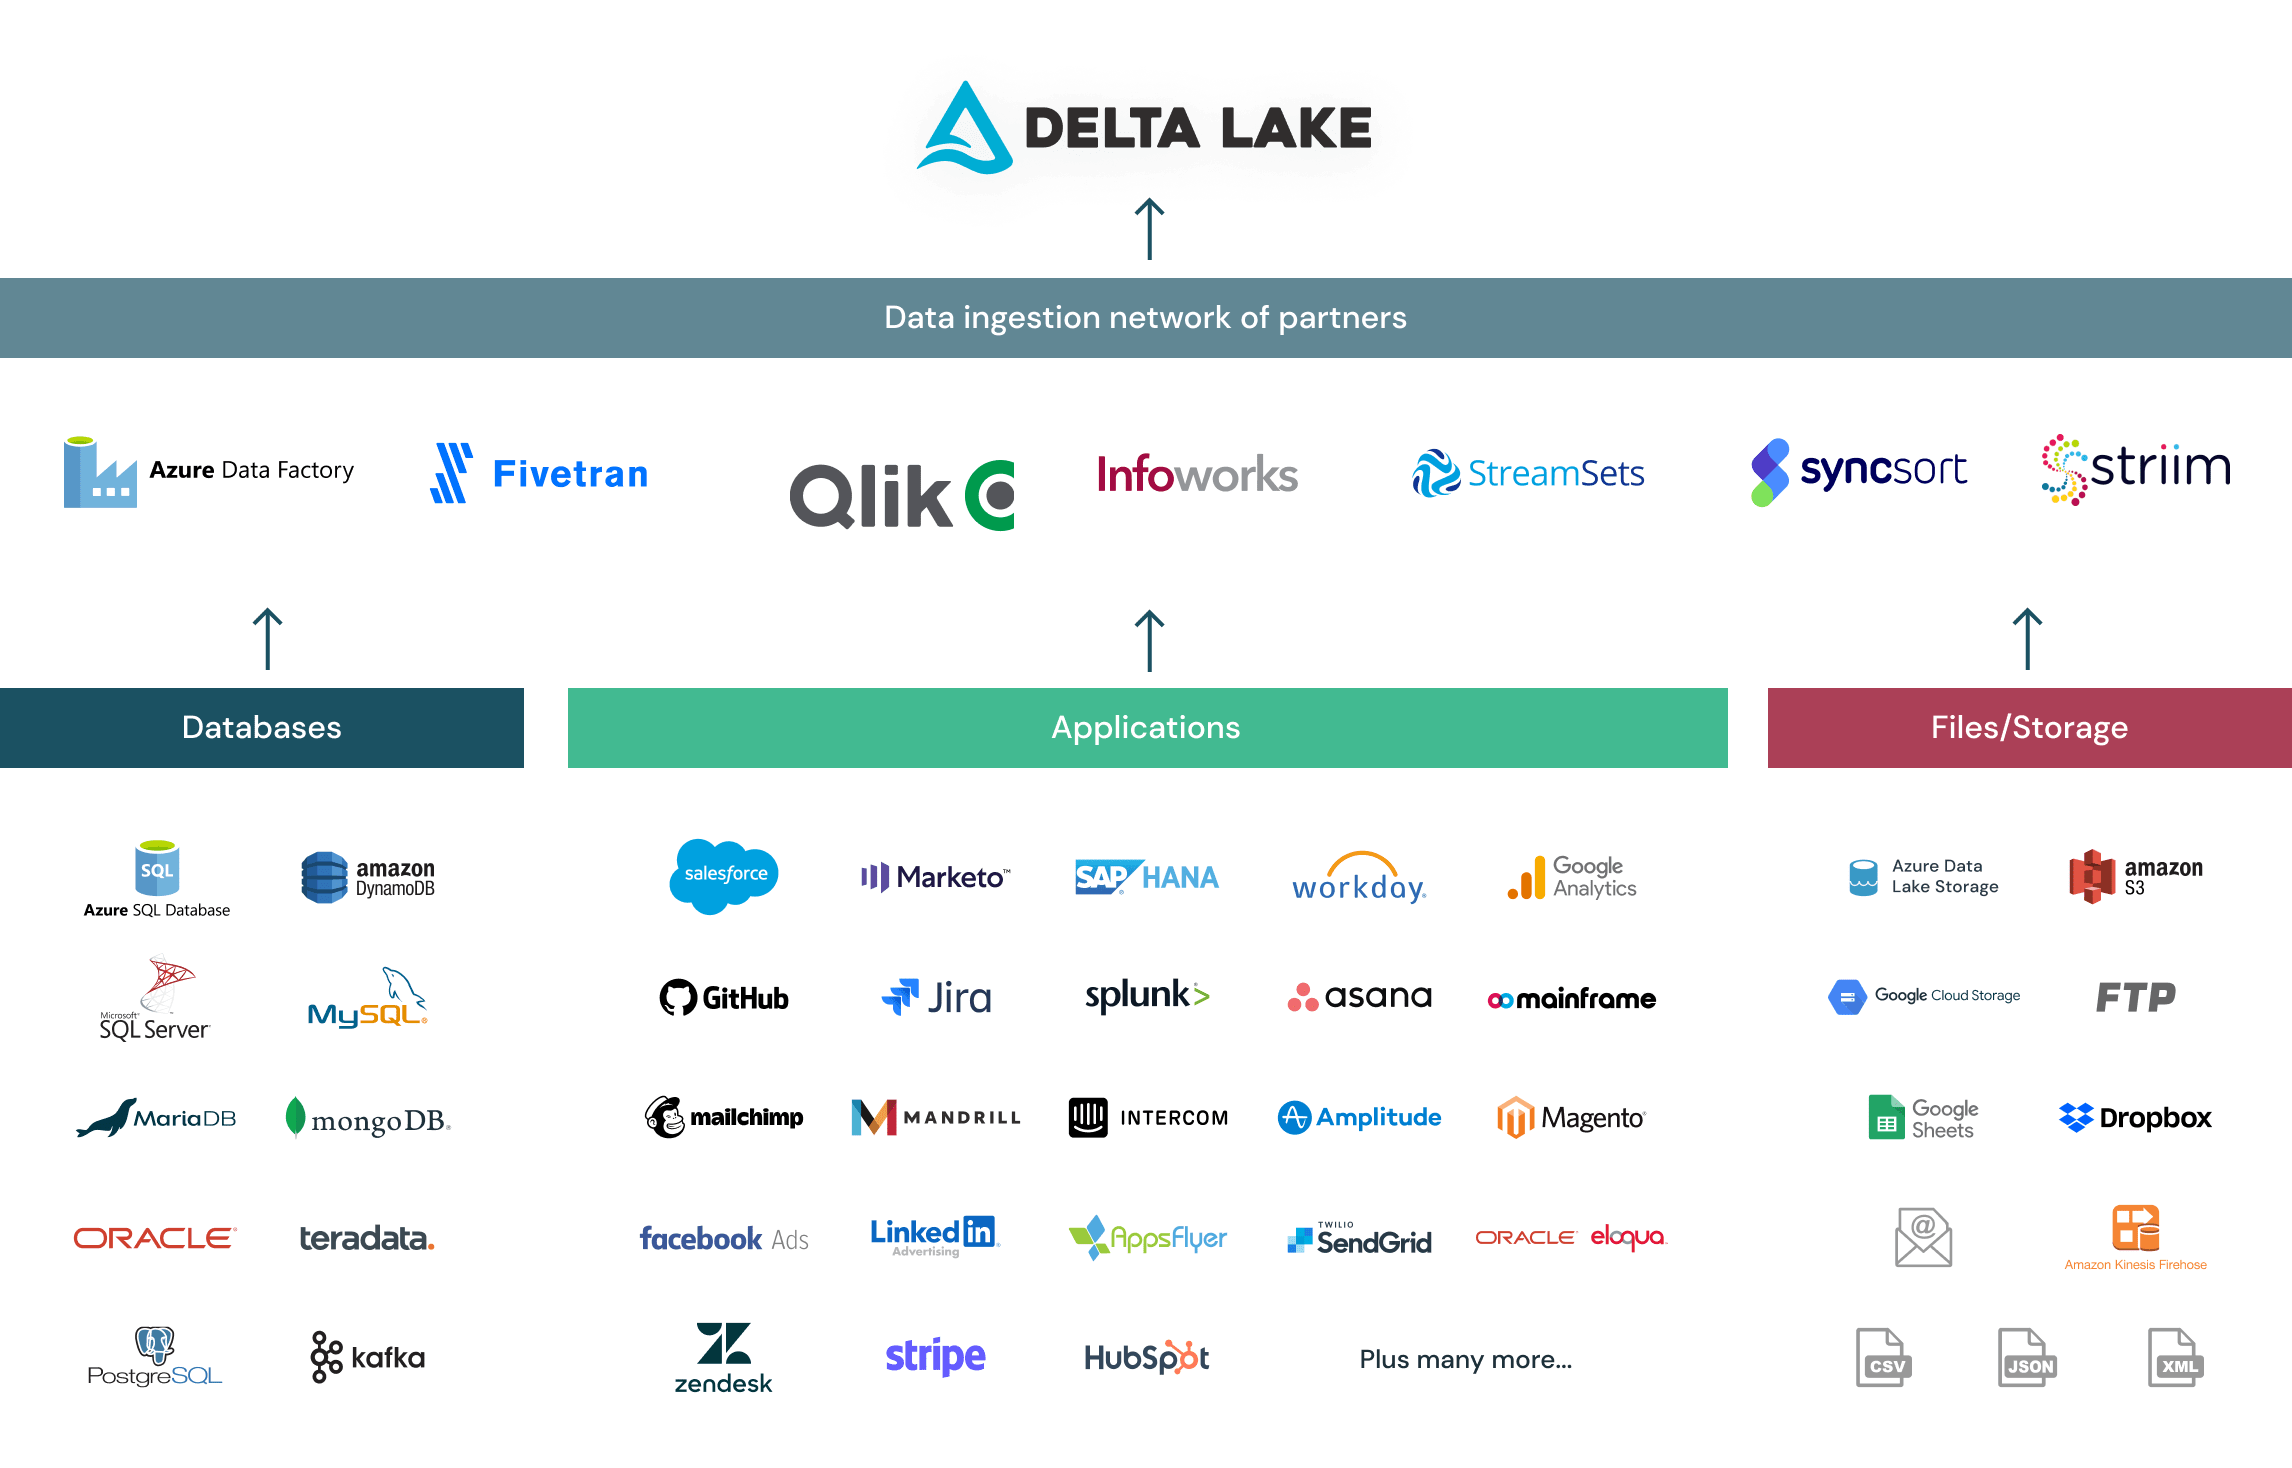 Data ingestion network of partners